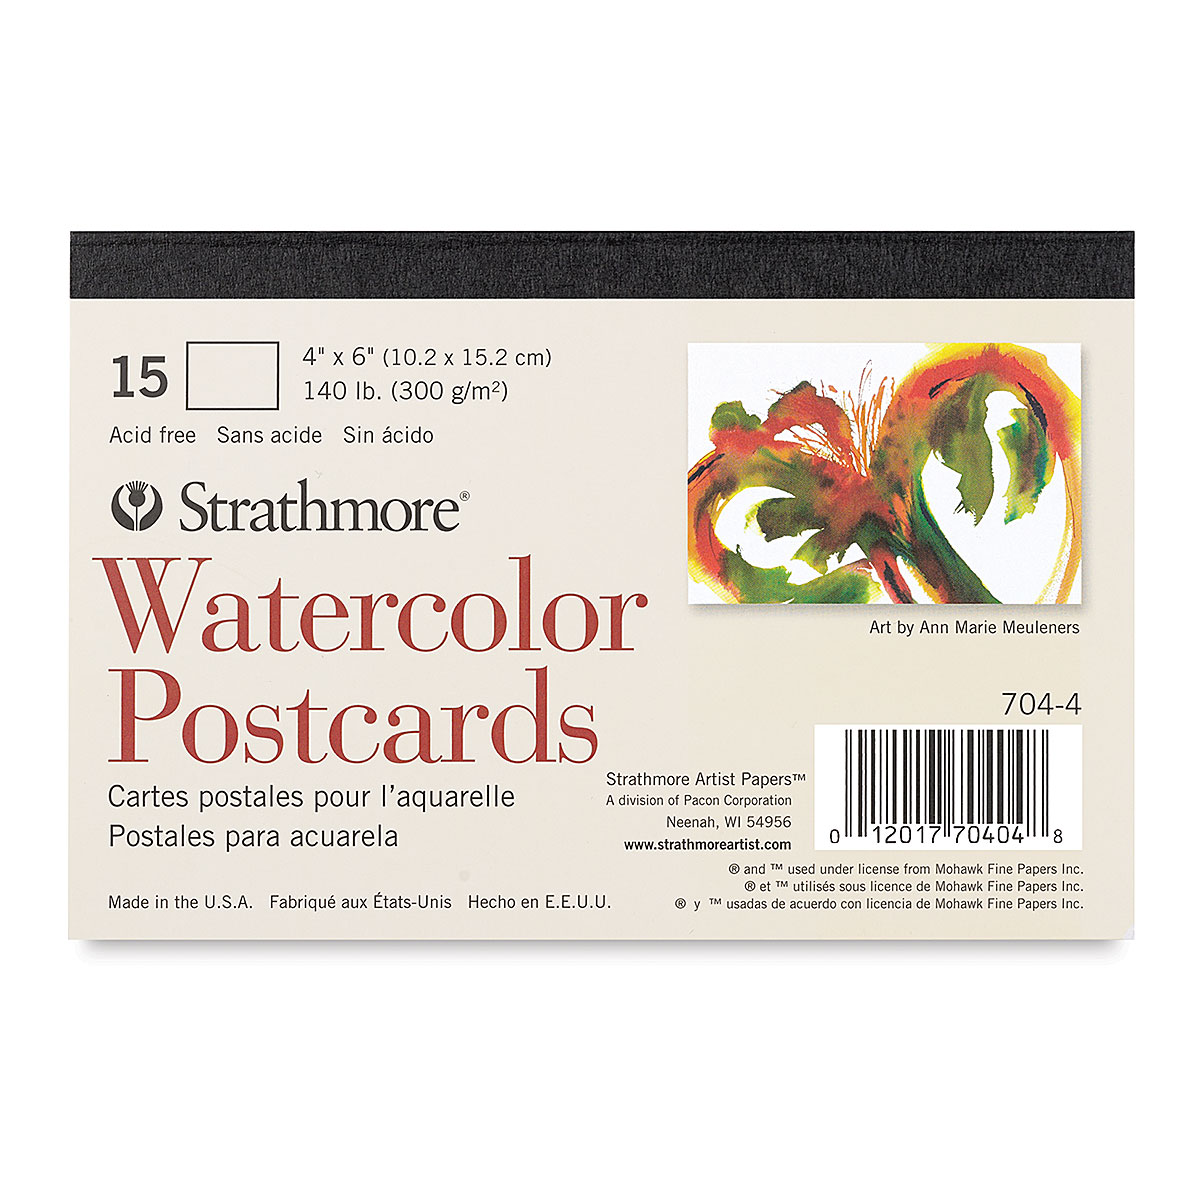 Strathmore Watercolor Cards, 5x6.875 inches, 100 Pack, Envelopes Included -  Custom Greeting Cards for Weddings, Events, Birthdays